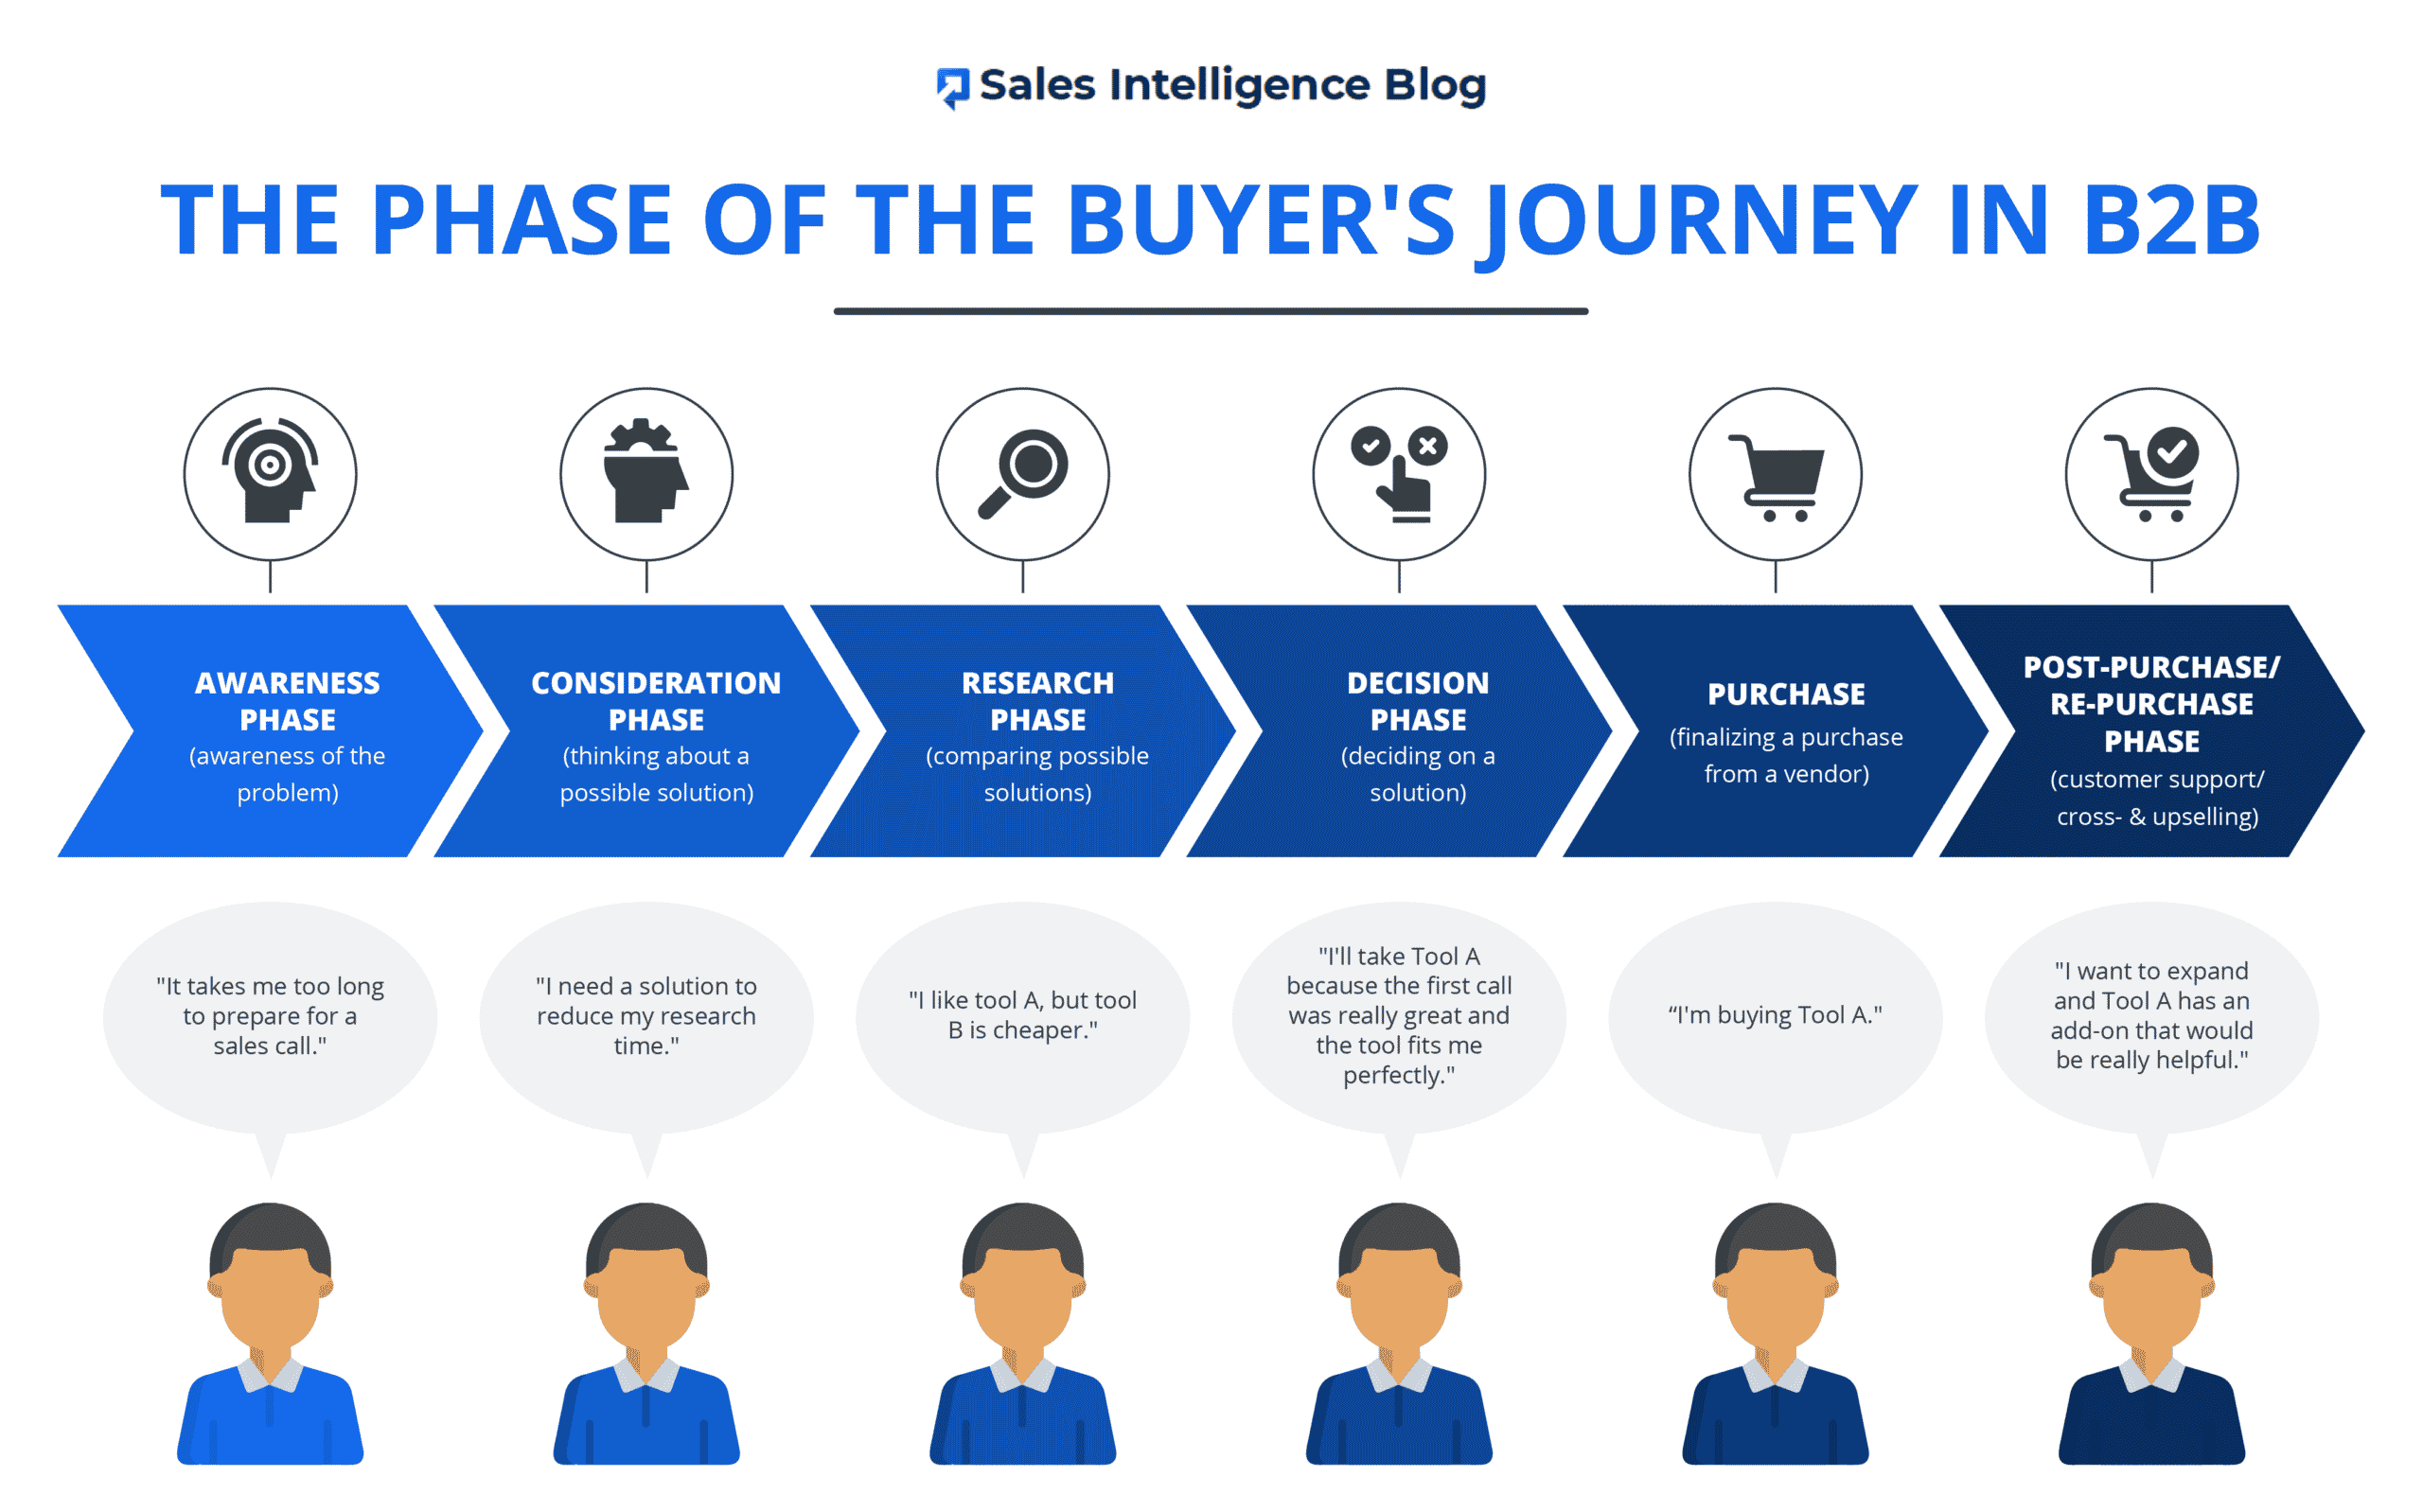 Image showing the phases of the buyer's journey in b2b